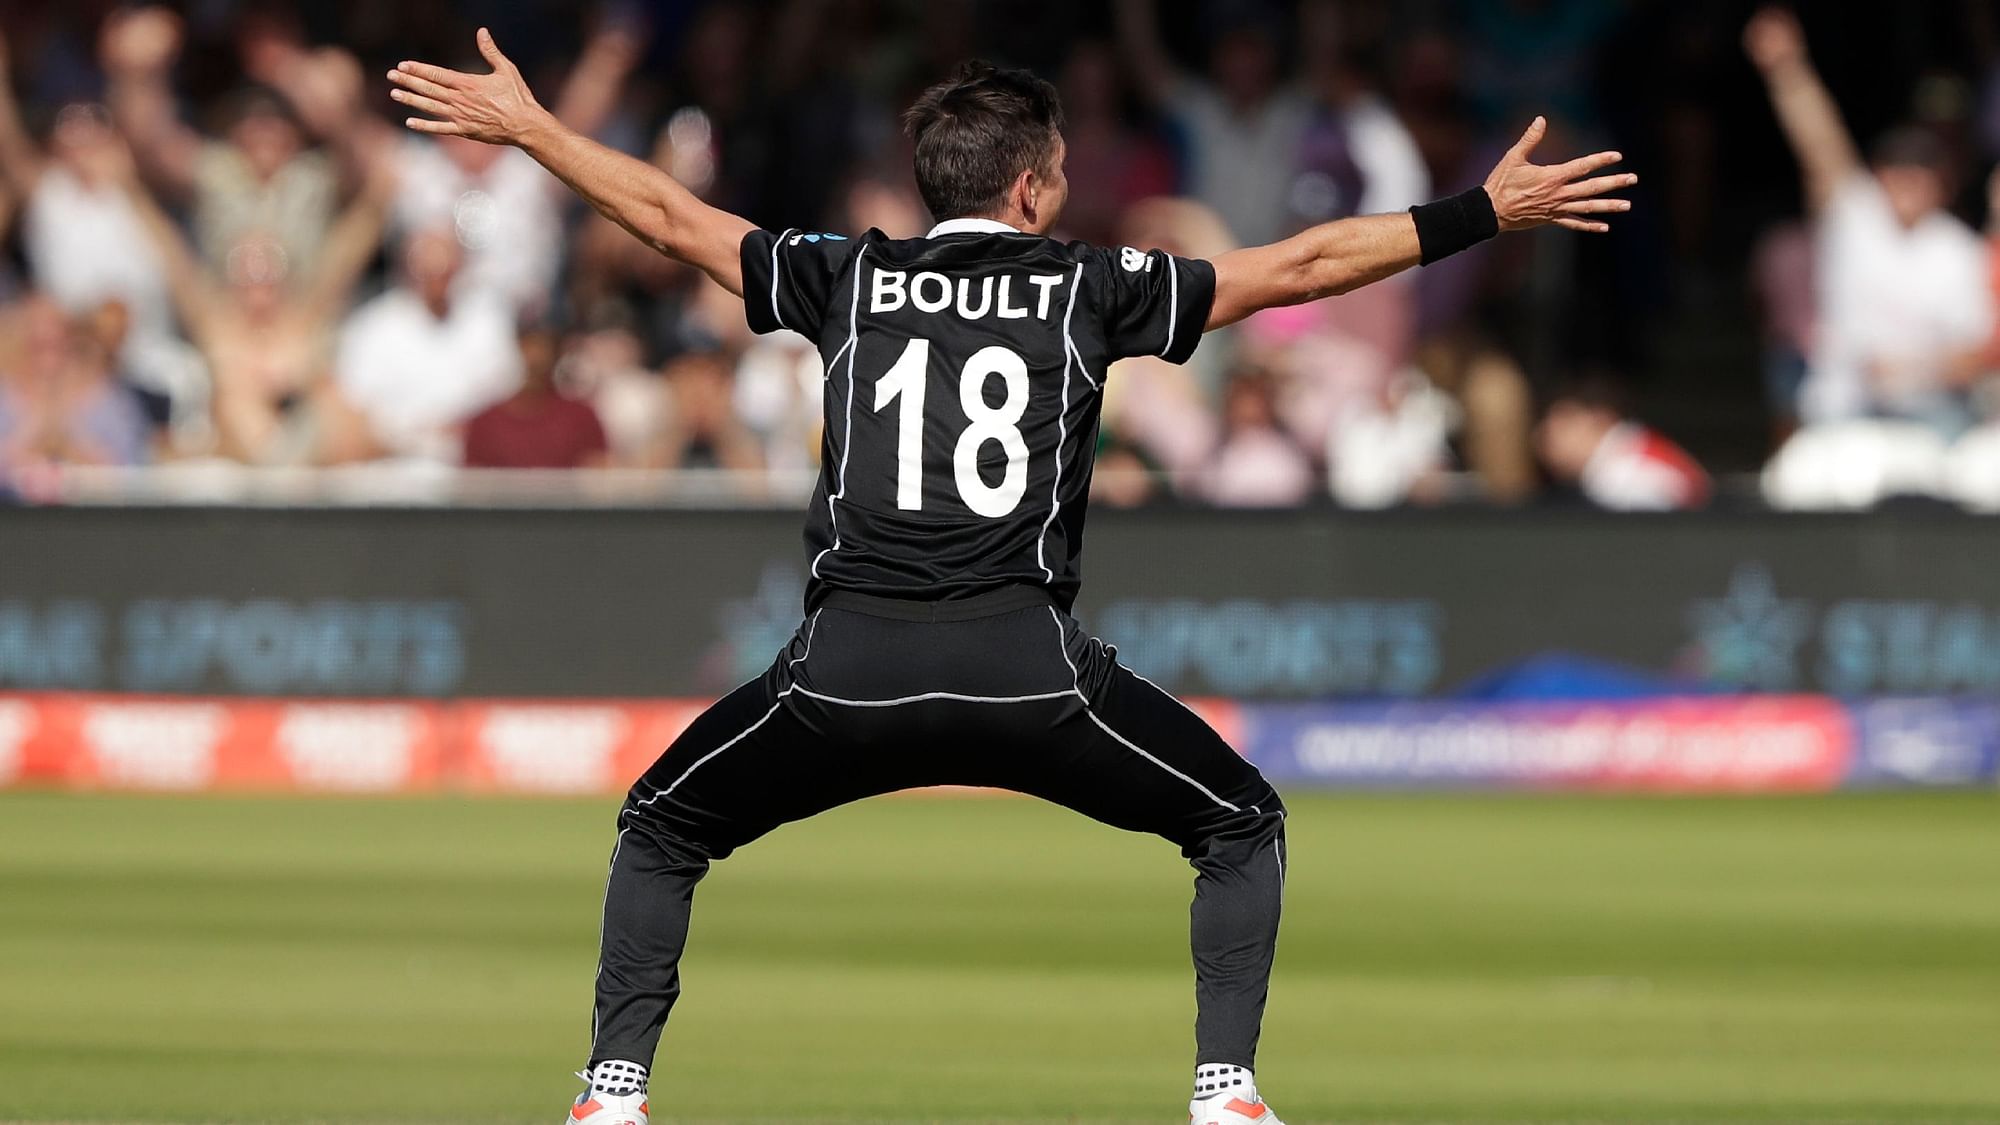 Trent Boult became the second bowler after India’s Mohammad Shami to take a hat-trick in this edition of the World Cup.